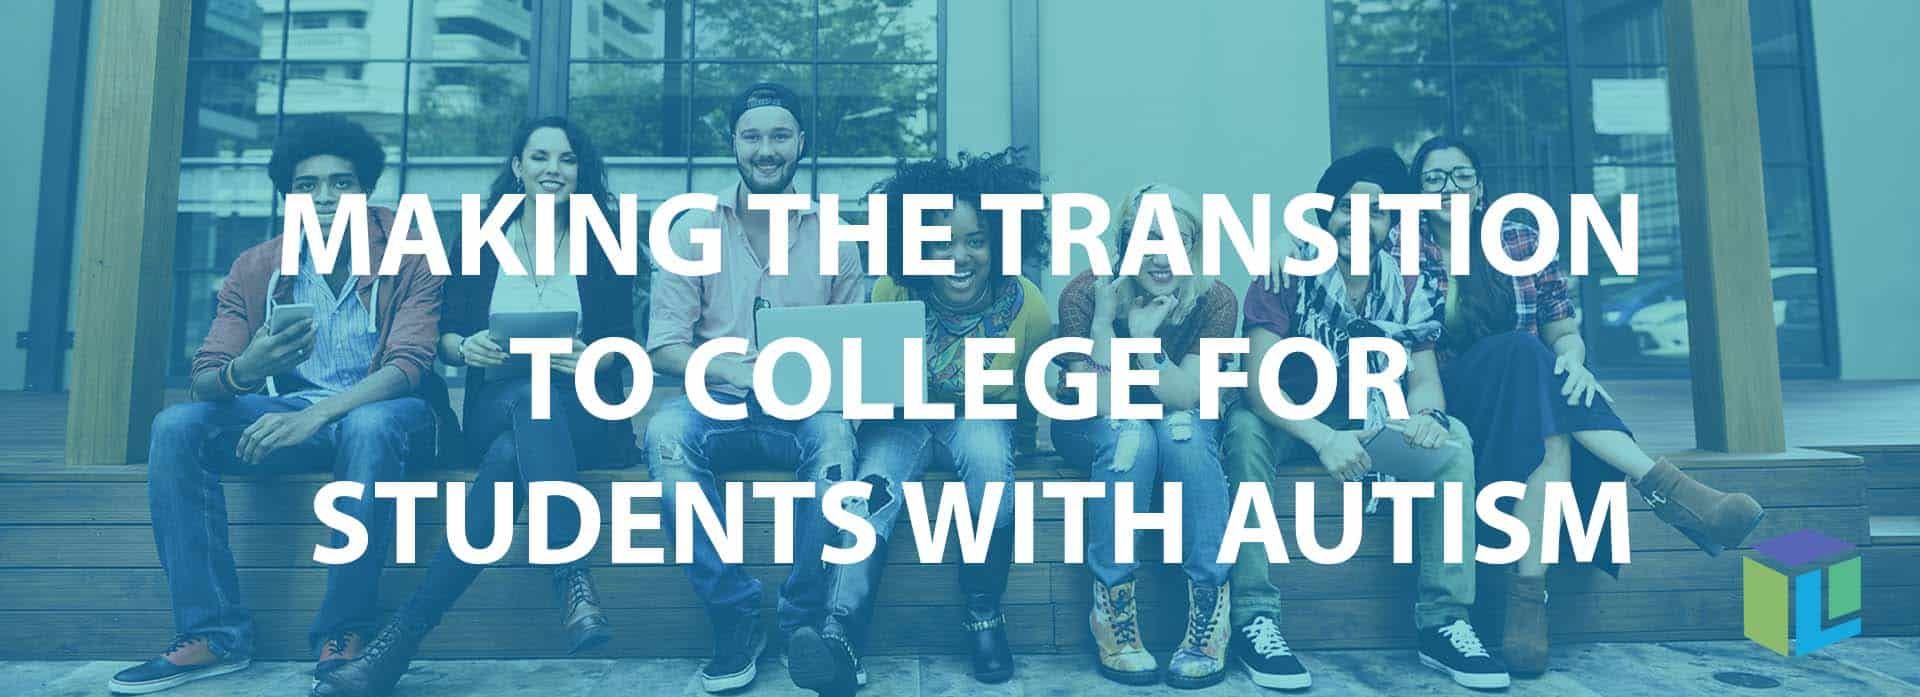 Making the Transition To College For Students With Autism Making the Transition To College For Students With Autism Making the Transition To College For Students With Autism Making the Transition To College For Students With Autism